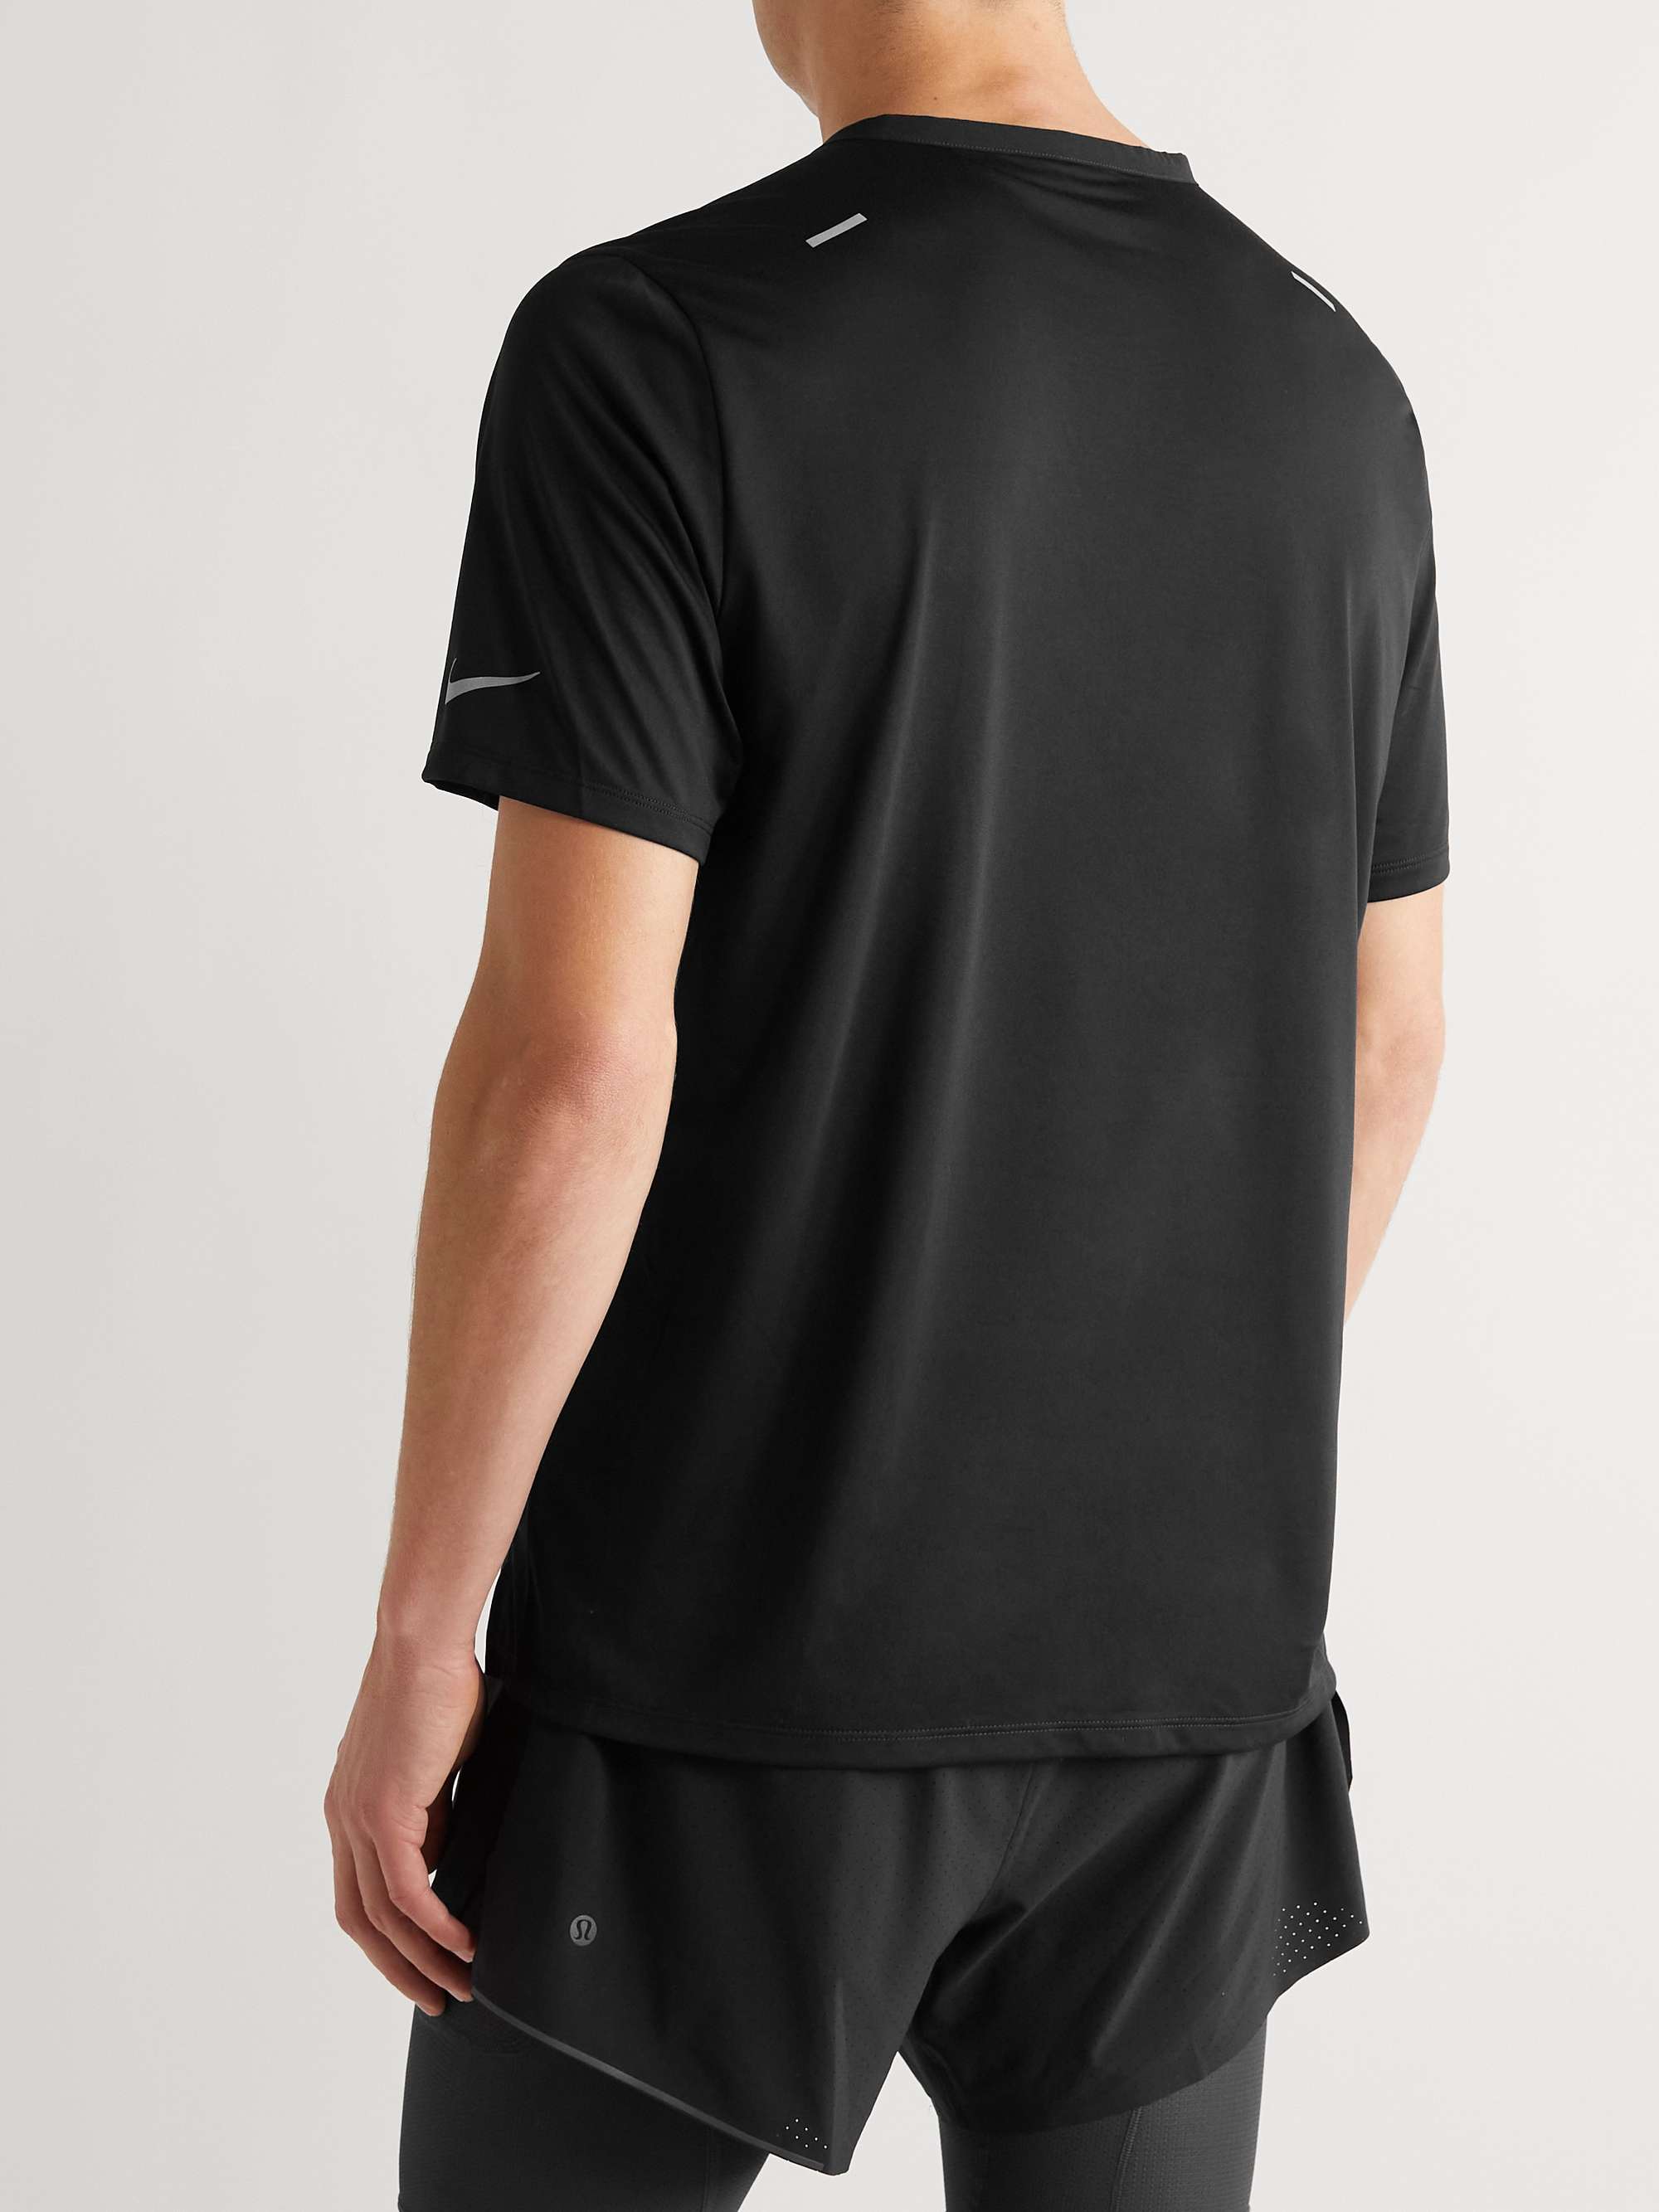 NIKE RUNNING Reflective-Trimmed Dri-FIT Jersey Top